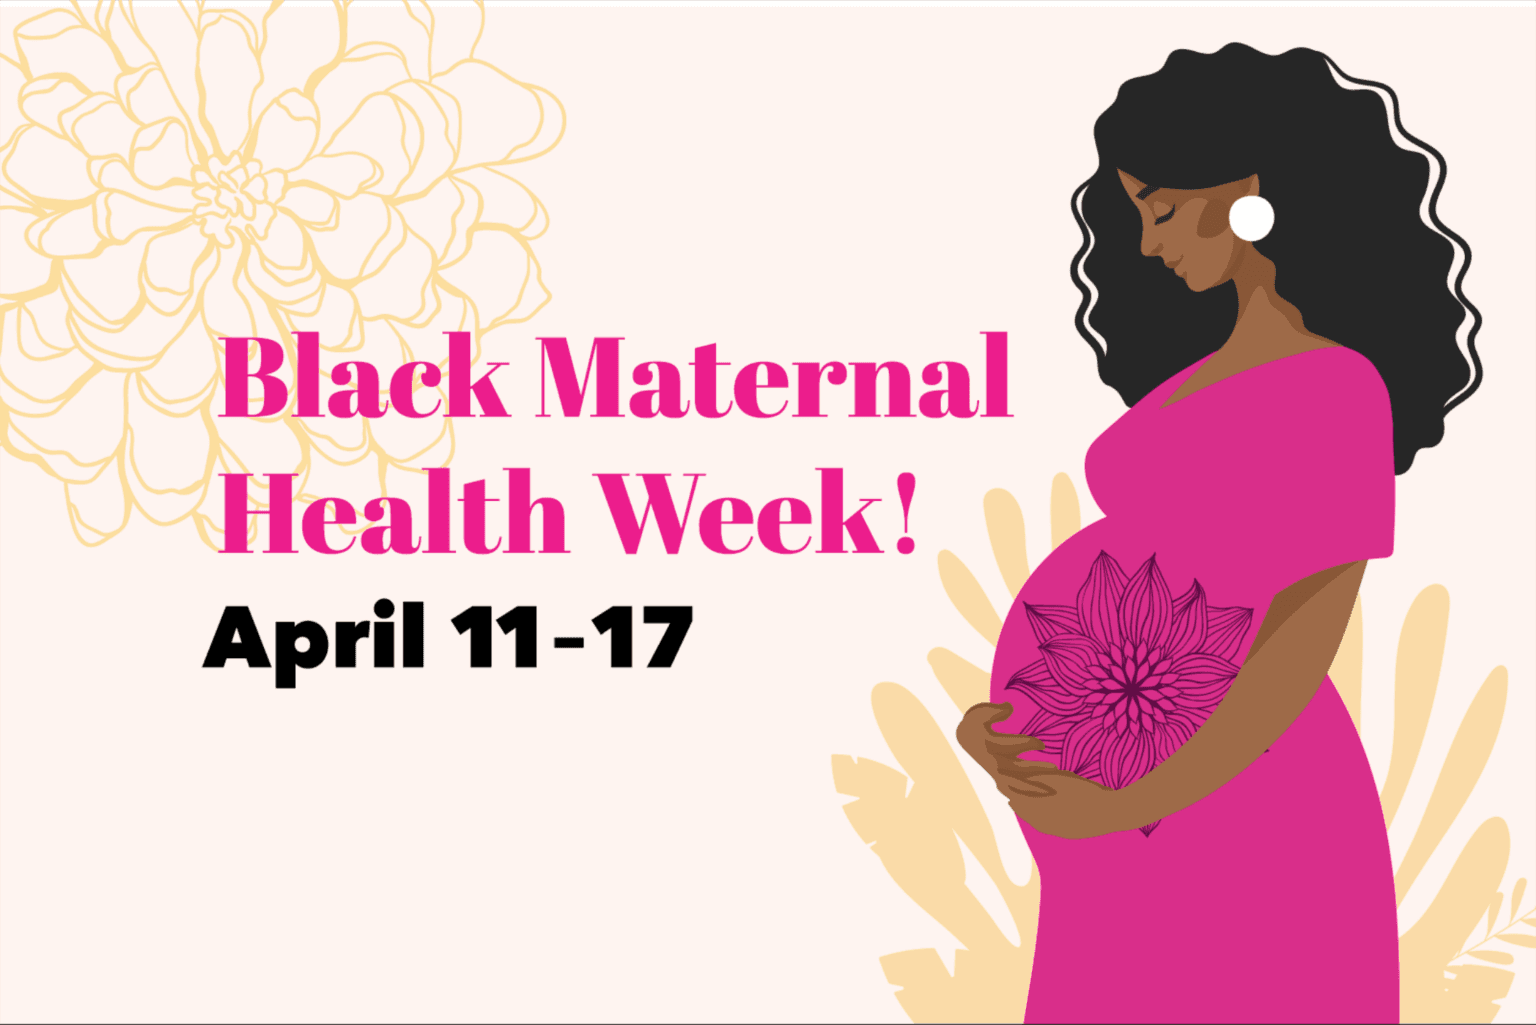 Black Maternal Health Week: Reproductive Justice Now!